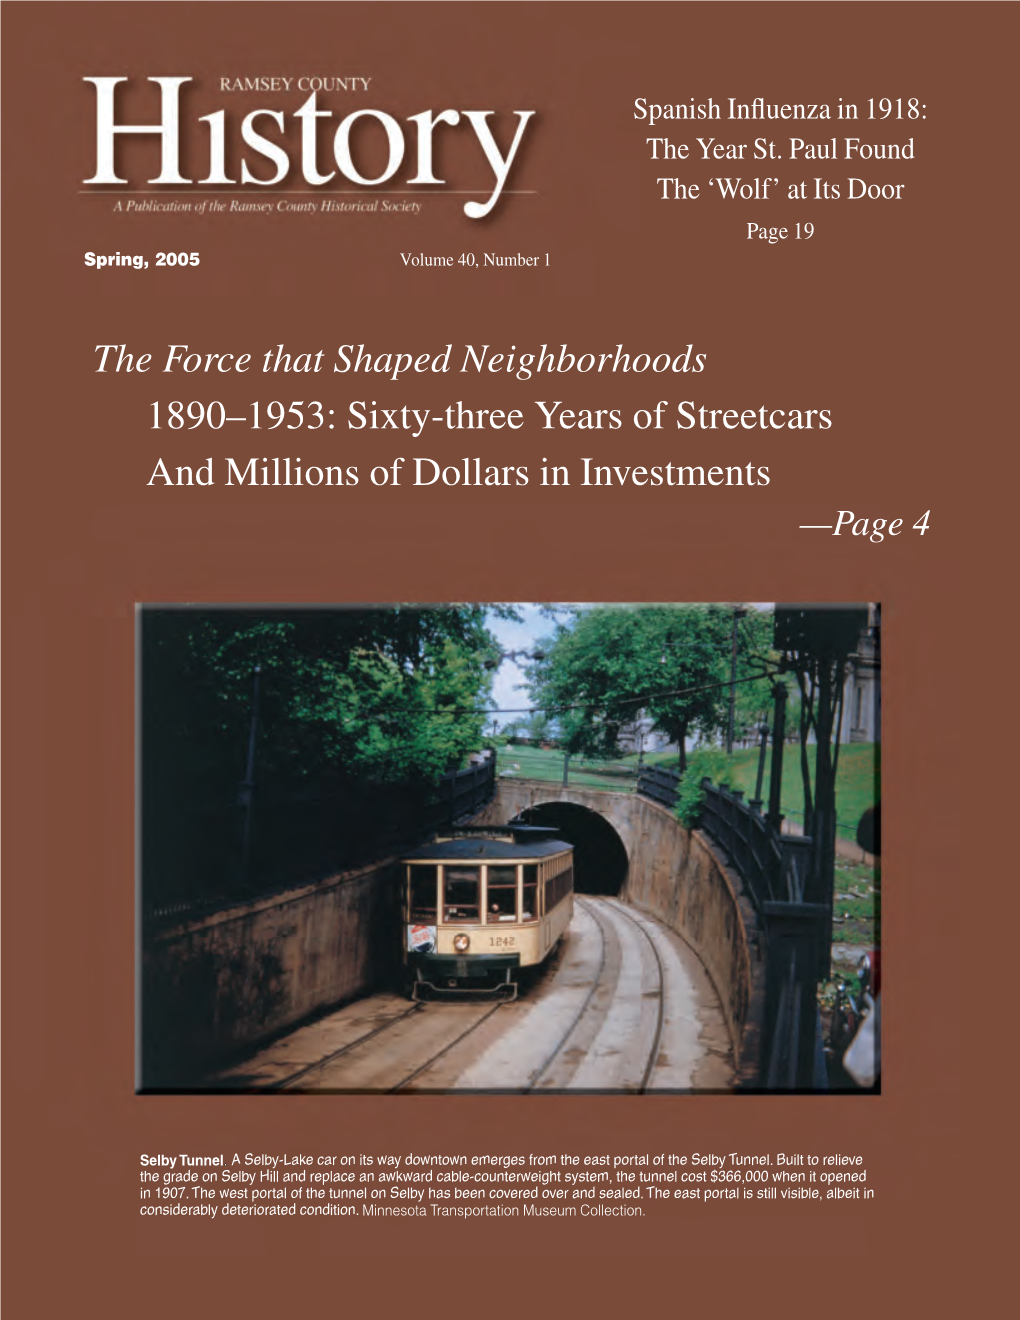 Sixty-Three Years of Streetcars and Millions of Dollars in Investments —Page 4